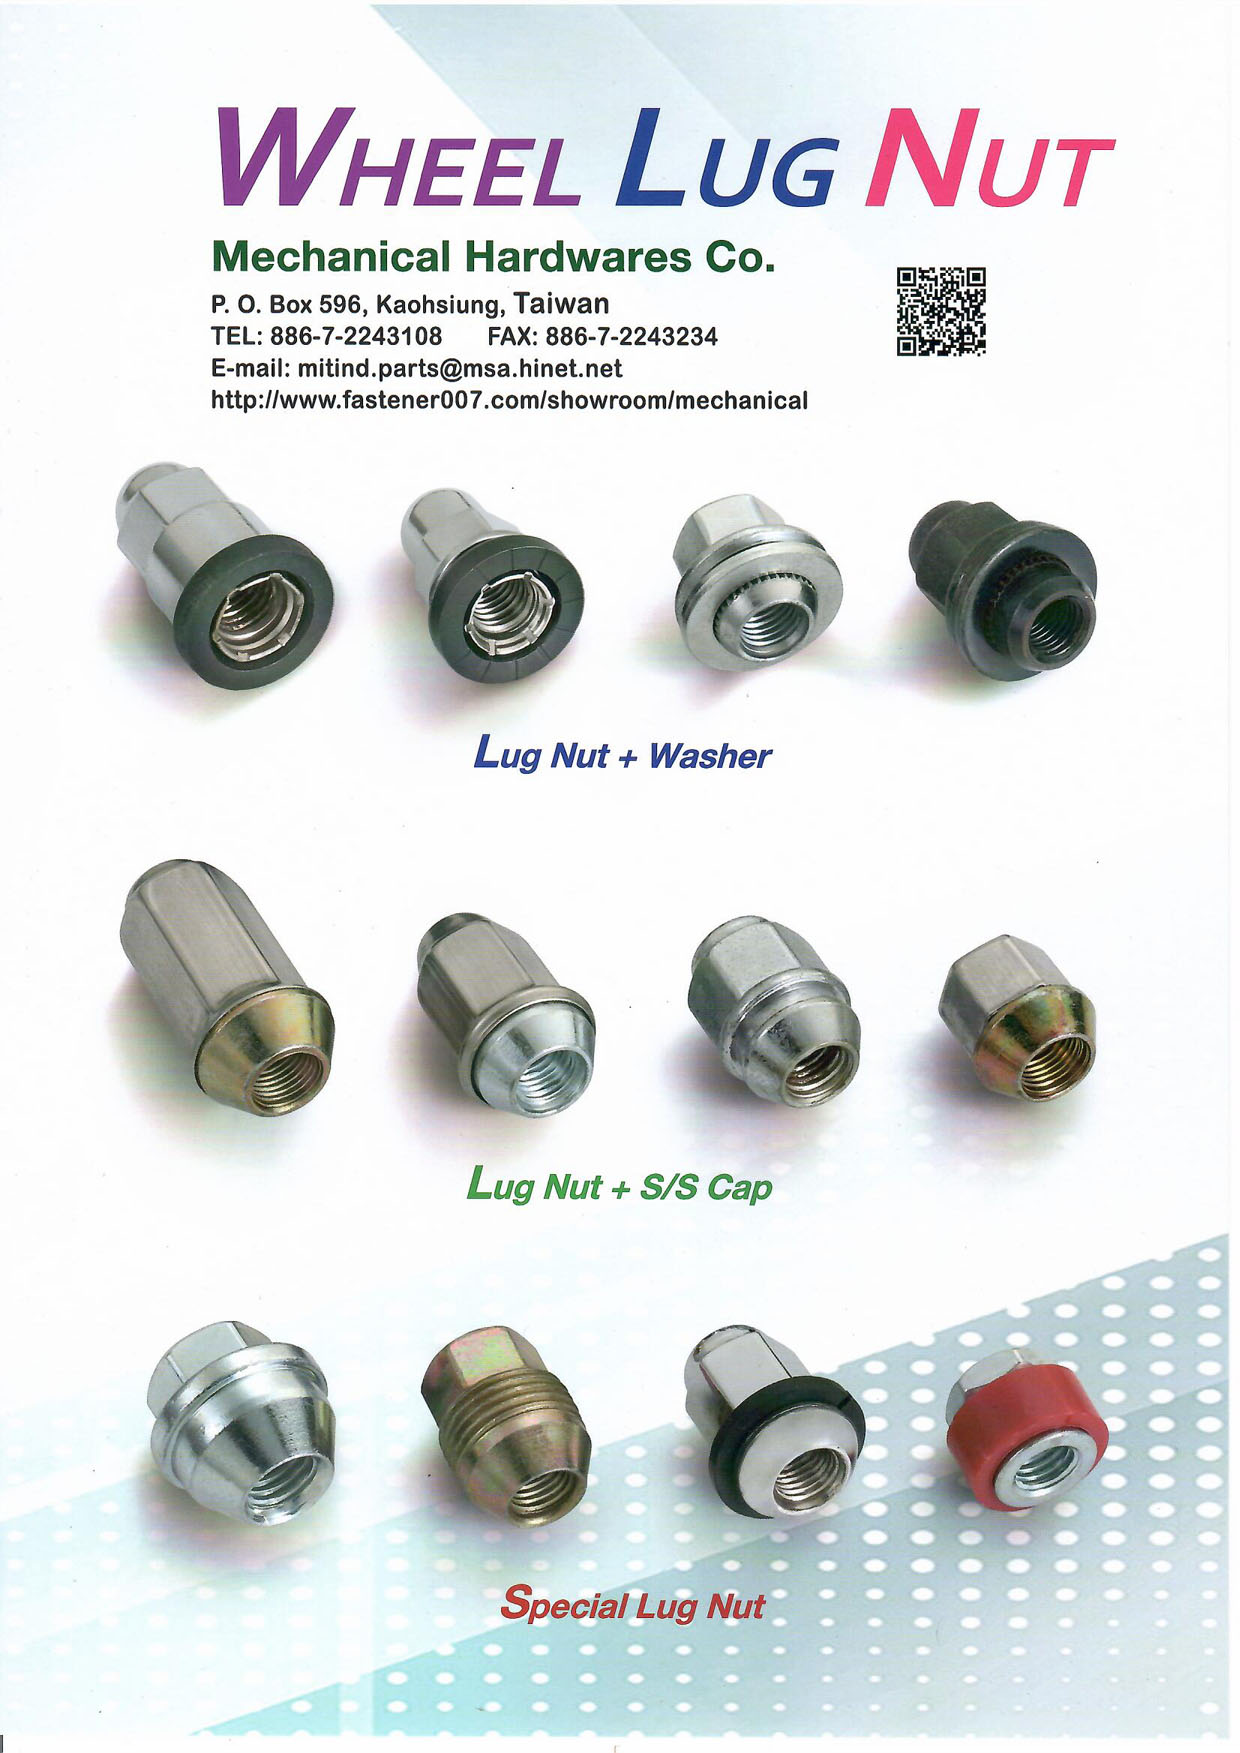 MIT INDUSTRIAL ACCESSORIES CORP. (MECHANICAL HARDWARES CO.)_Online Catalogues